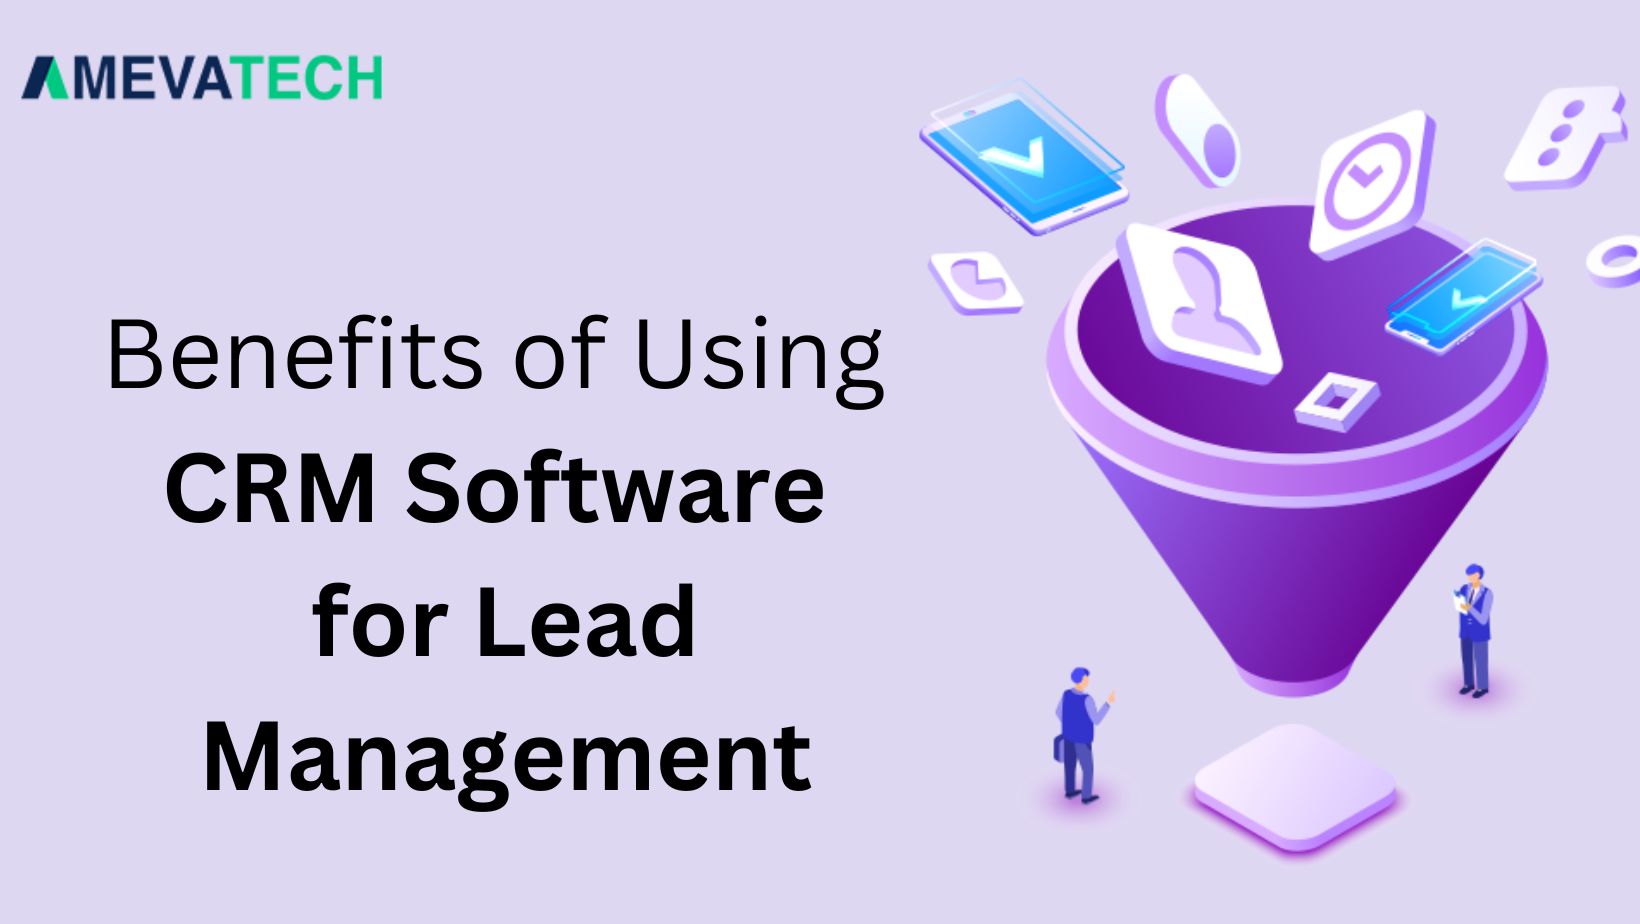 CRM Software for Lead Management